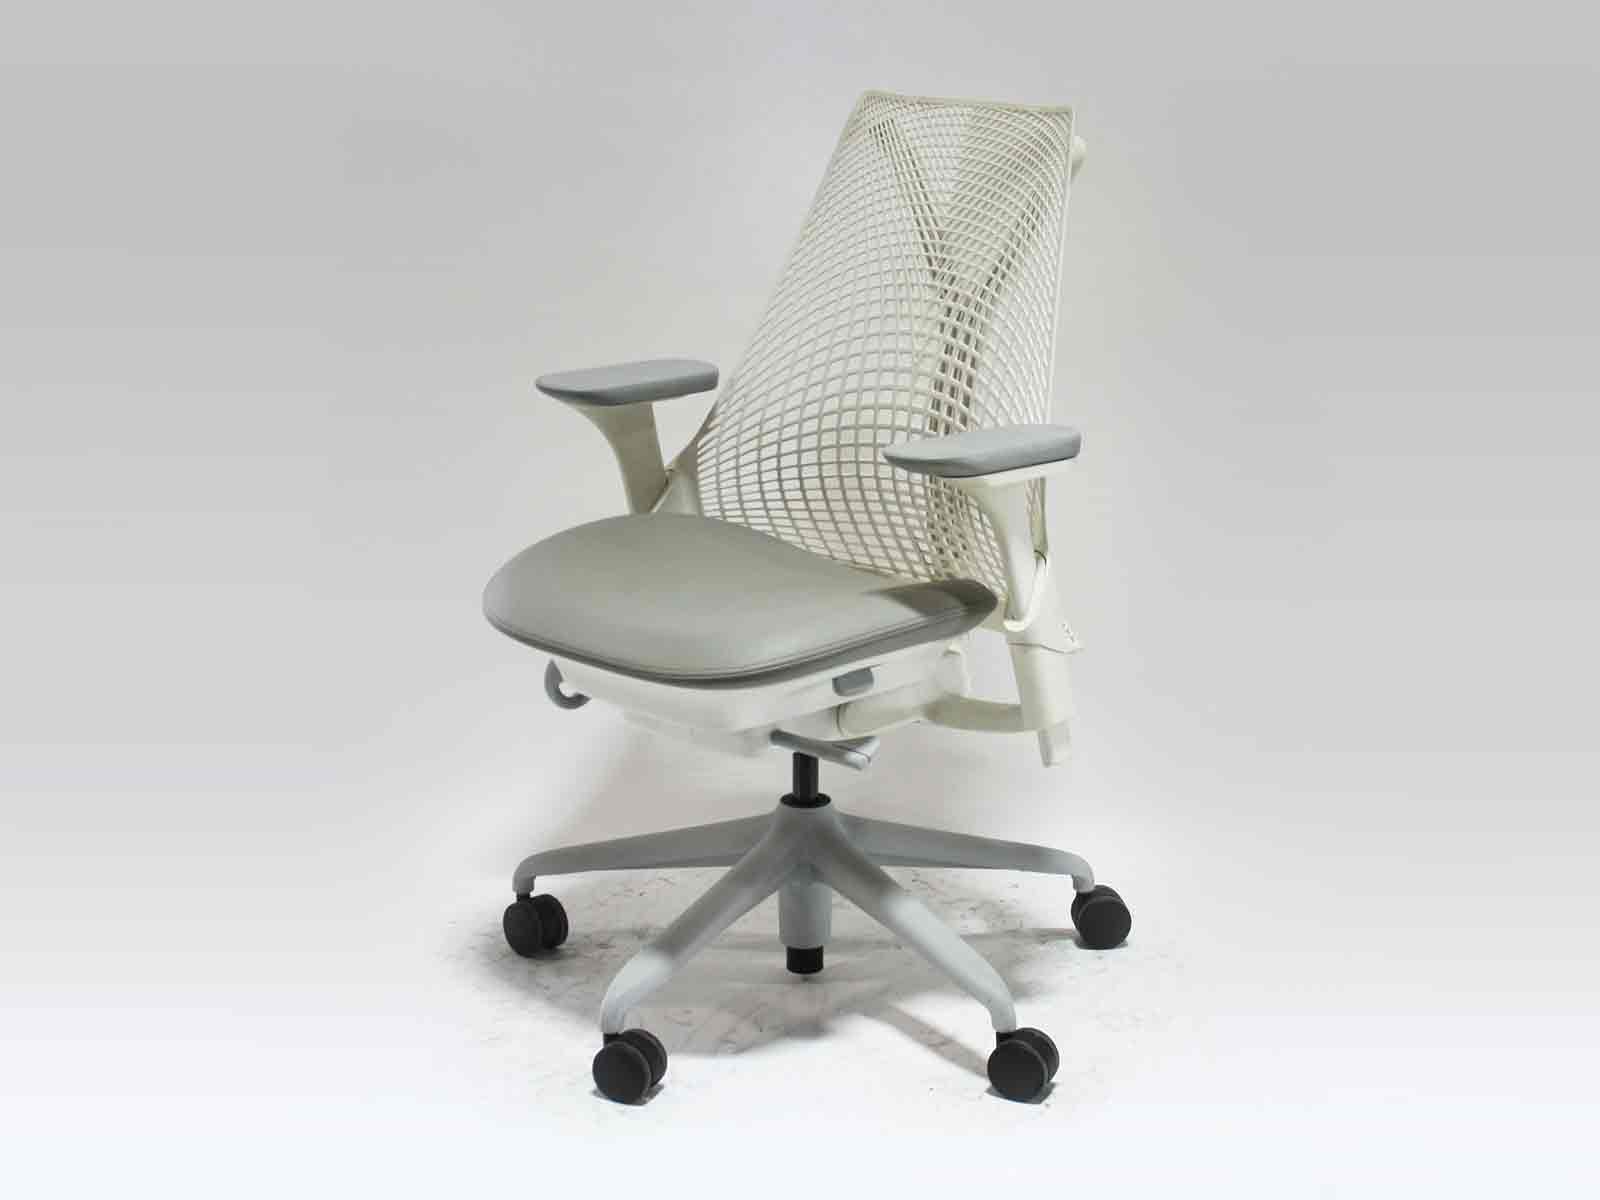 New White Herman Miller Sayl Office Chairs Orlando At Office Furniture Outlet